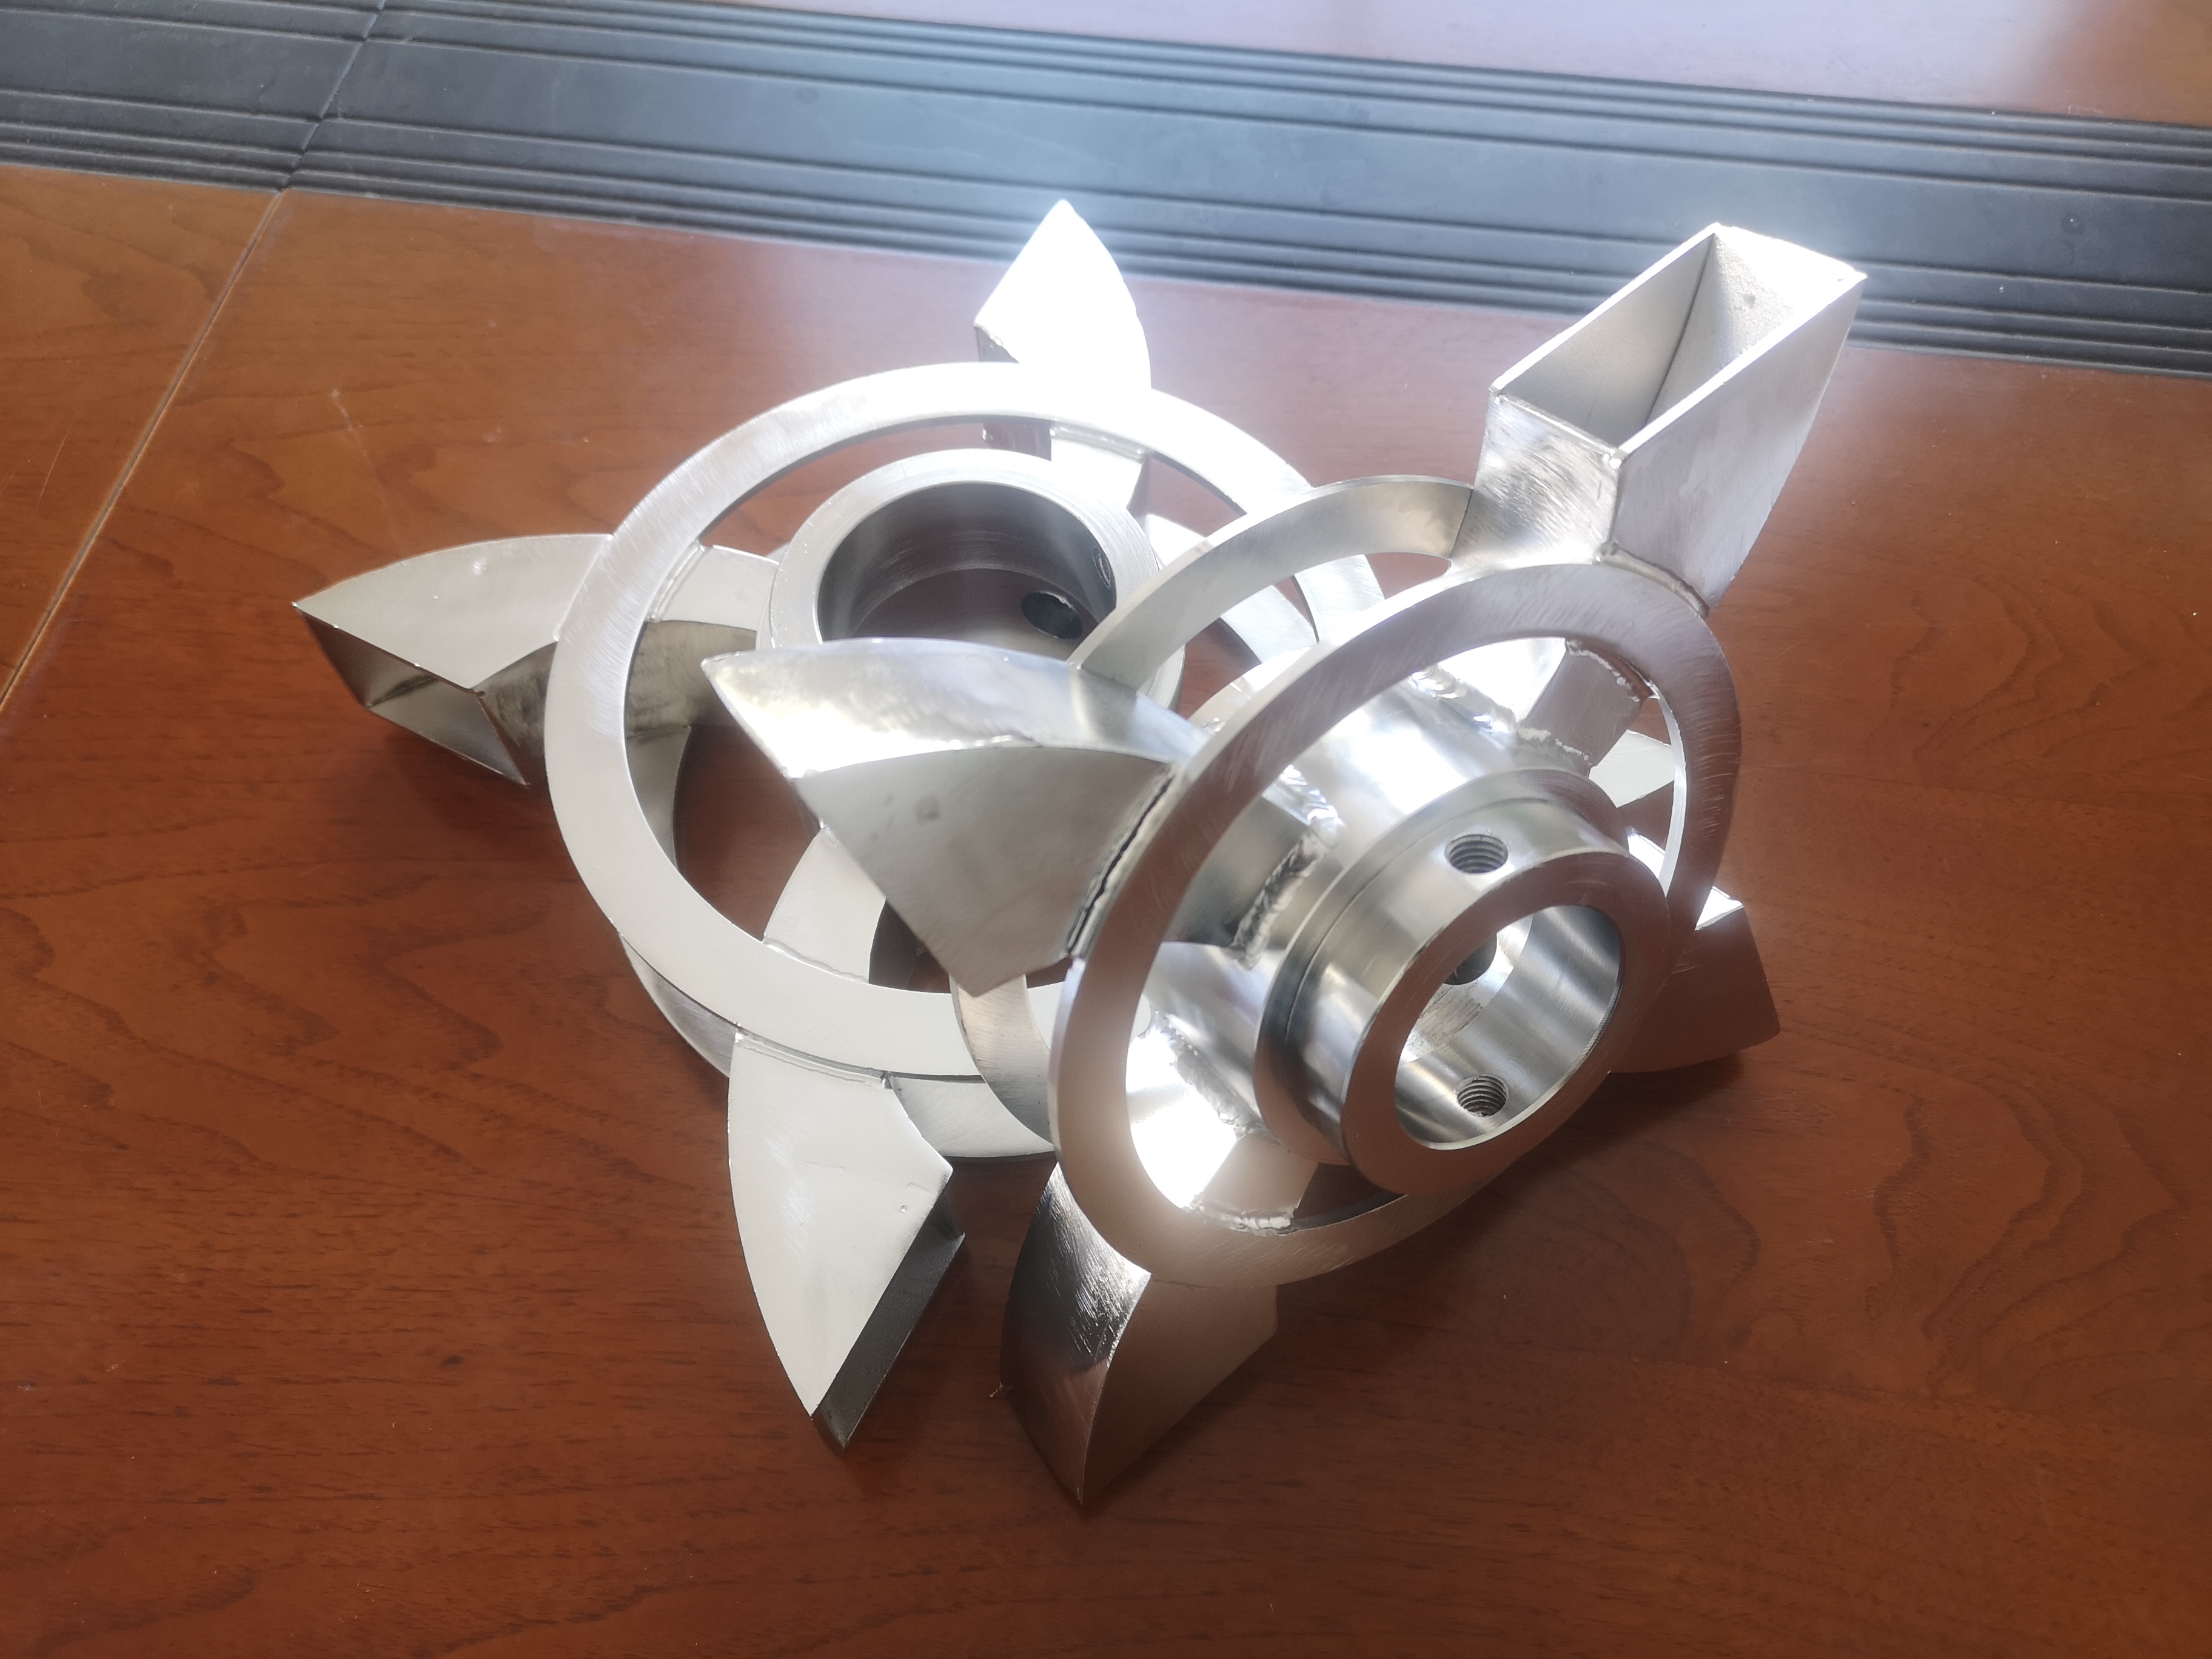 Gas induction impeller